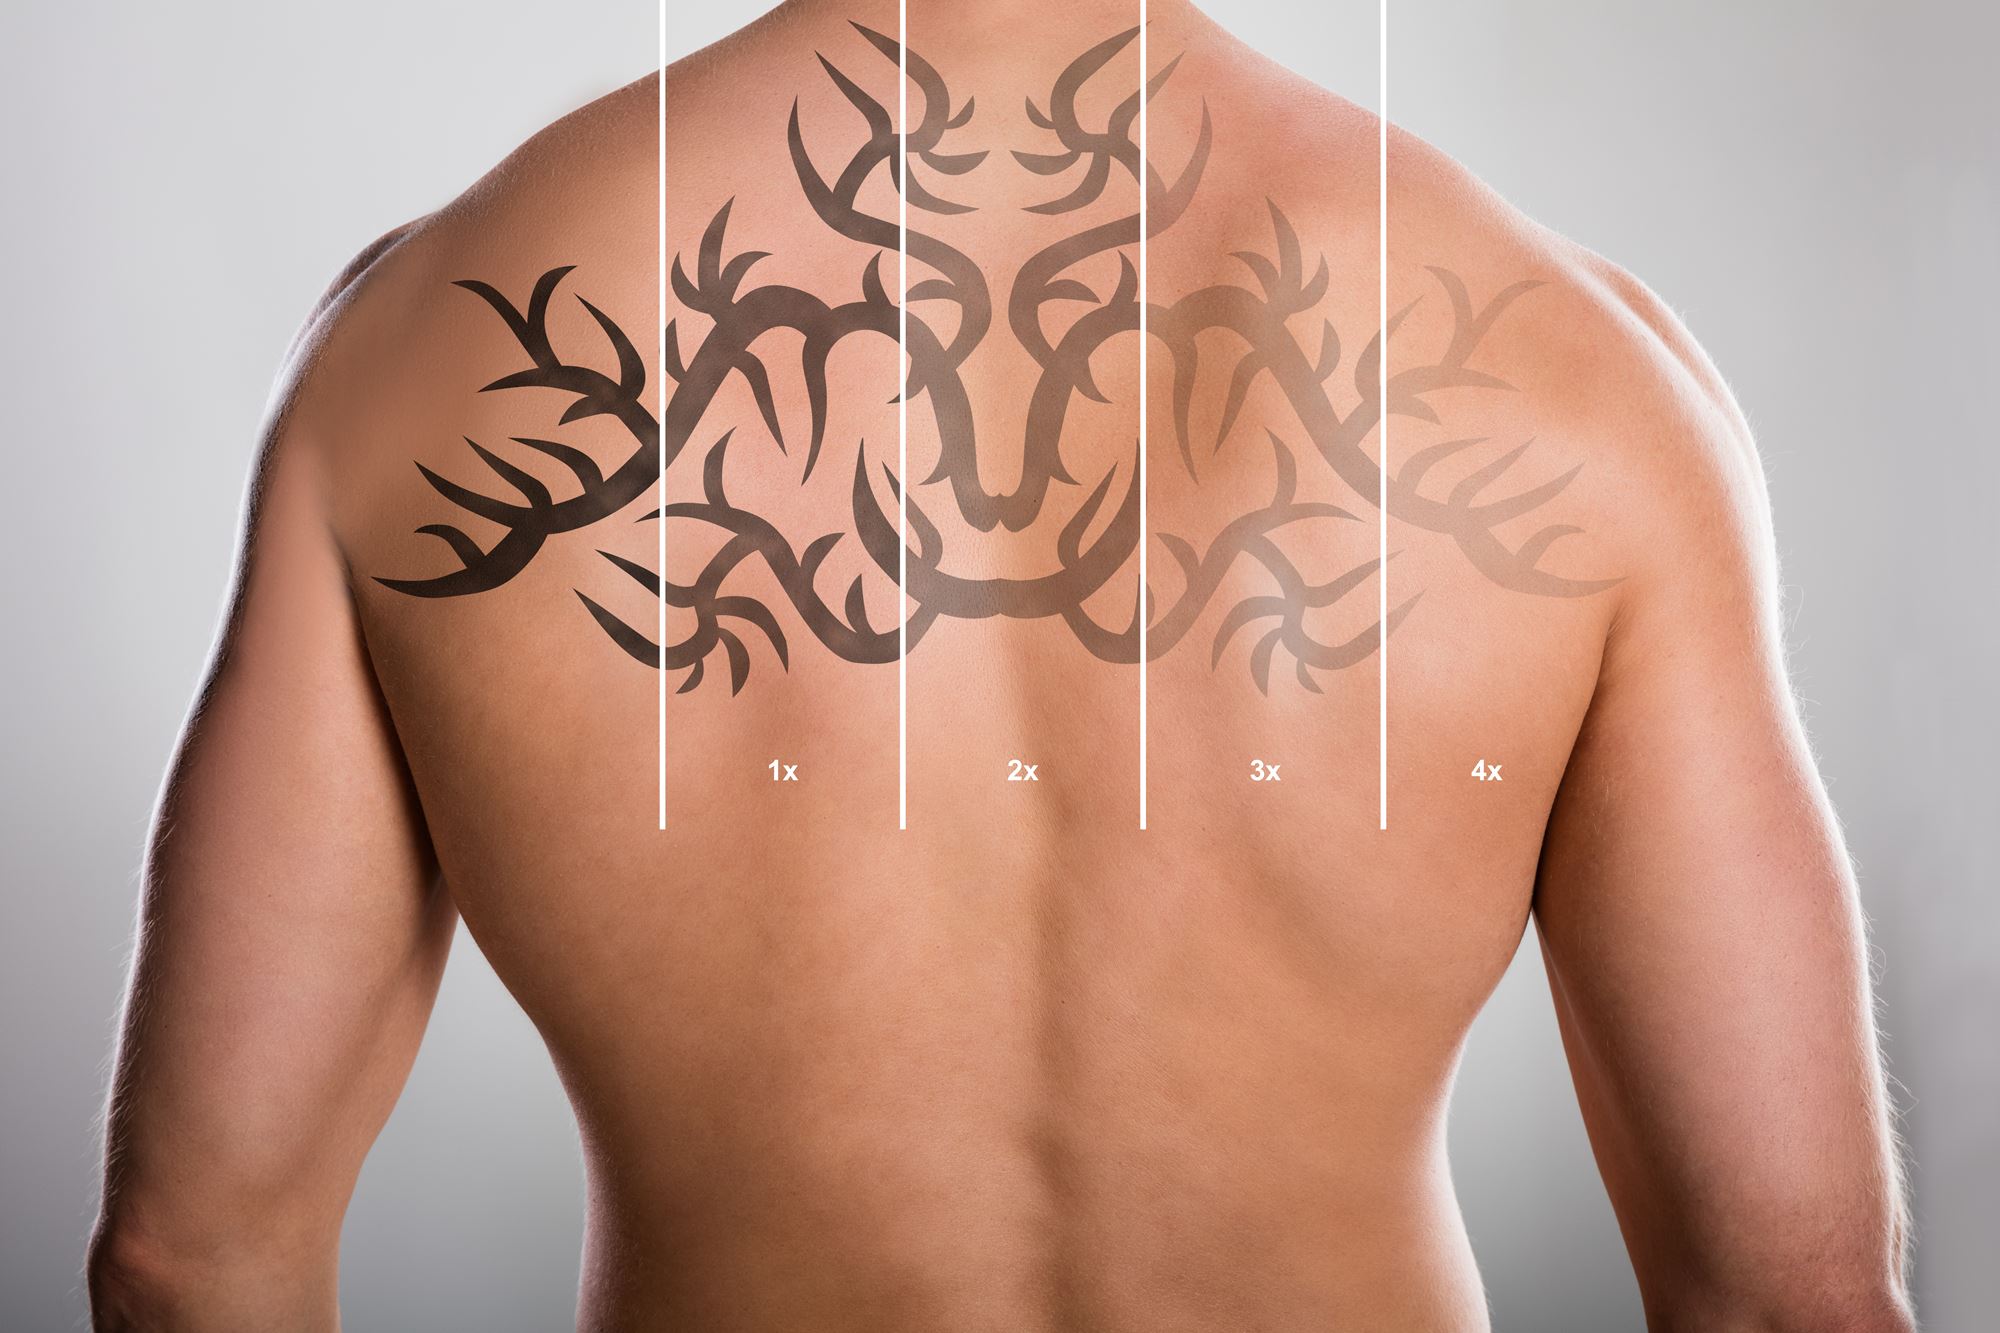 Laser Tattoo removal graph on shirtless man